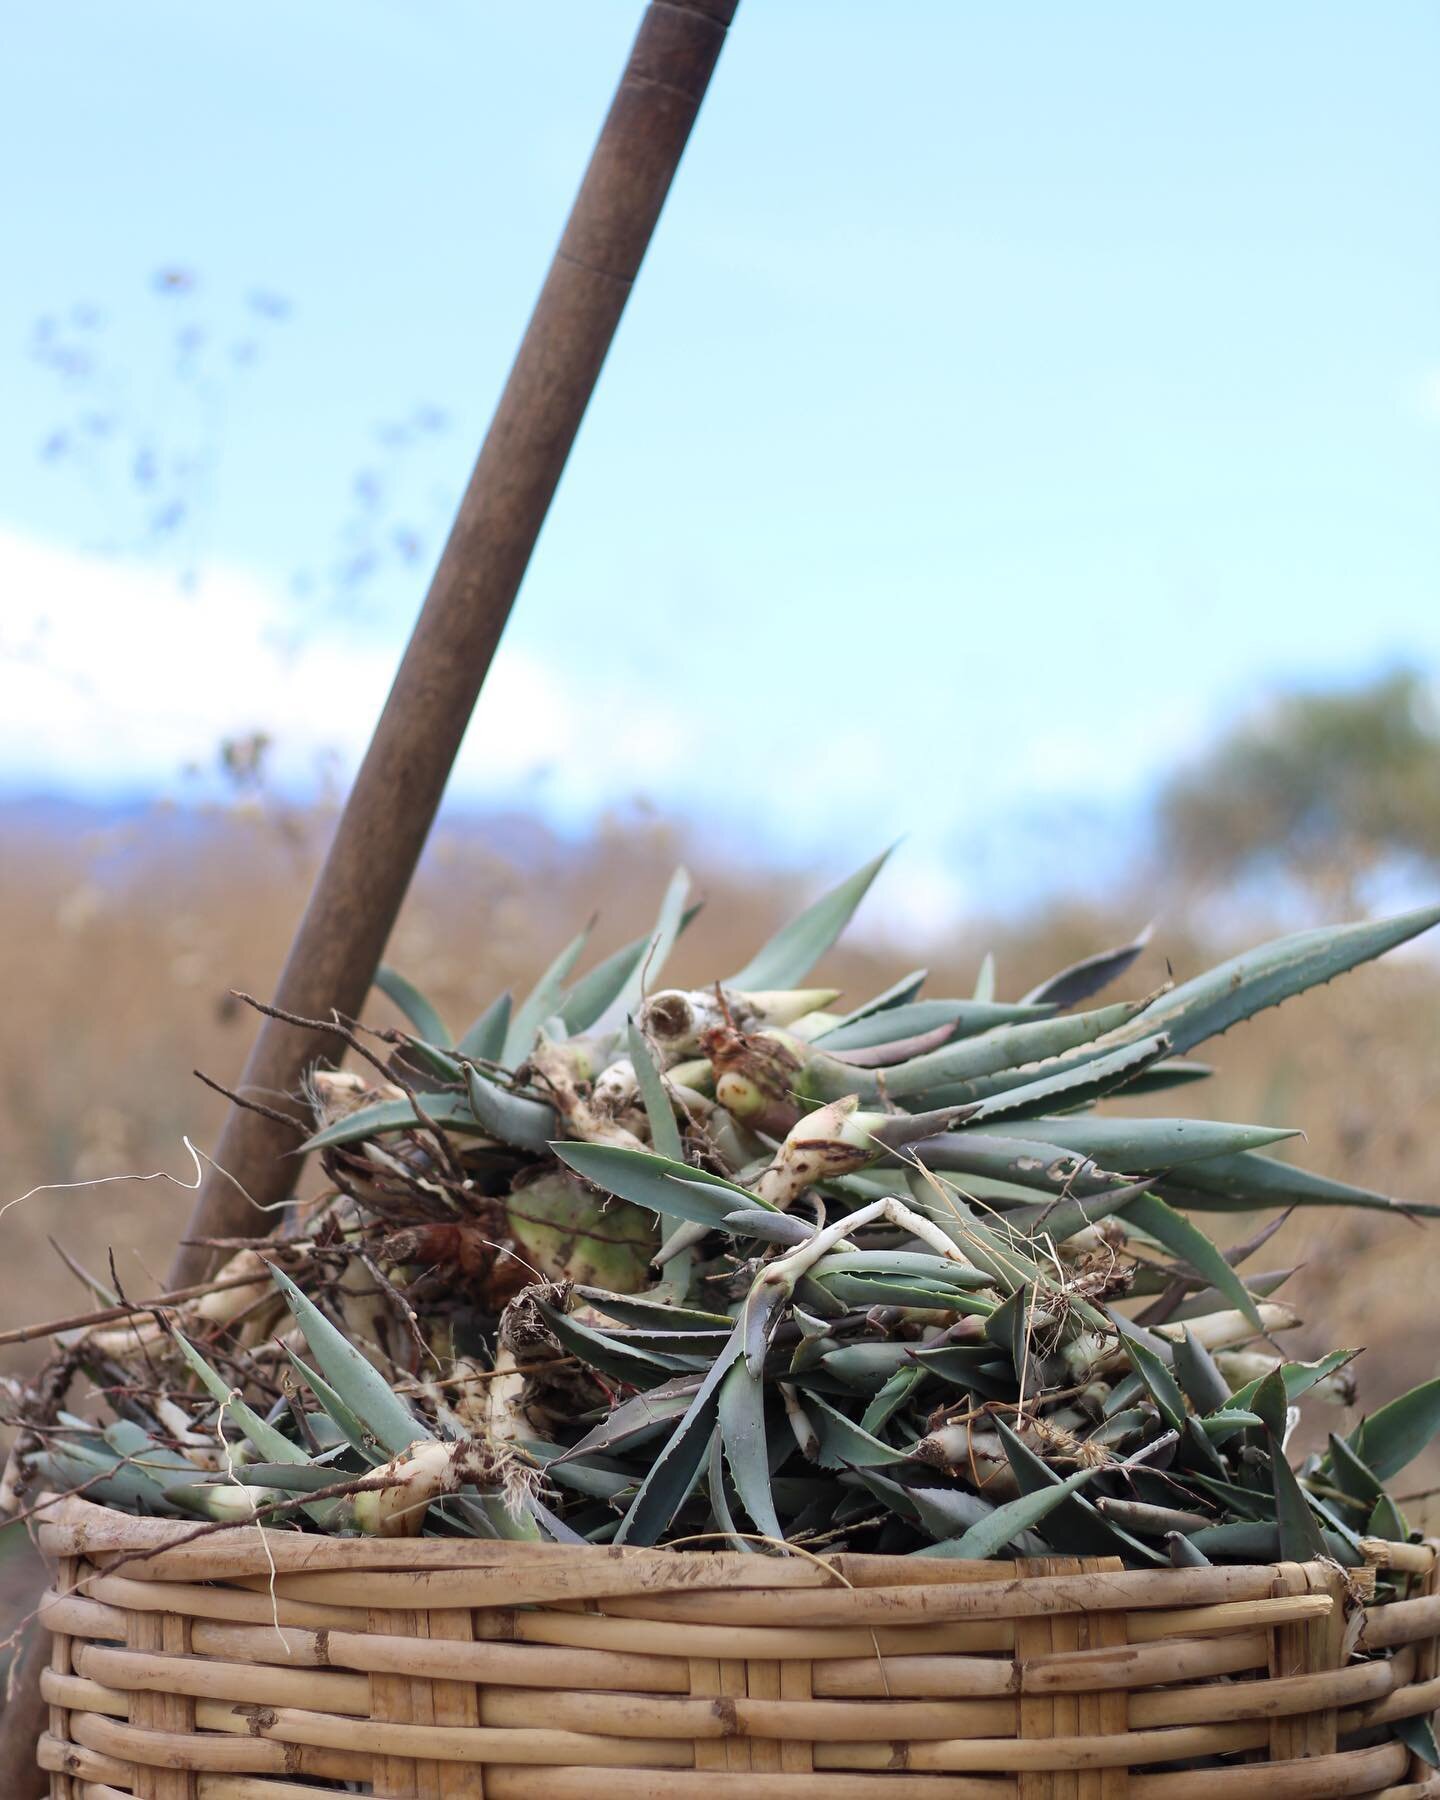 With Machete and &ldquo;Cu&ntilde;a&rdquo;, 10 to 15 tons are used in each batch. 
#GranjaNomada #Mezcal